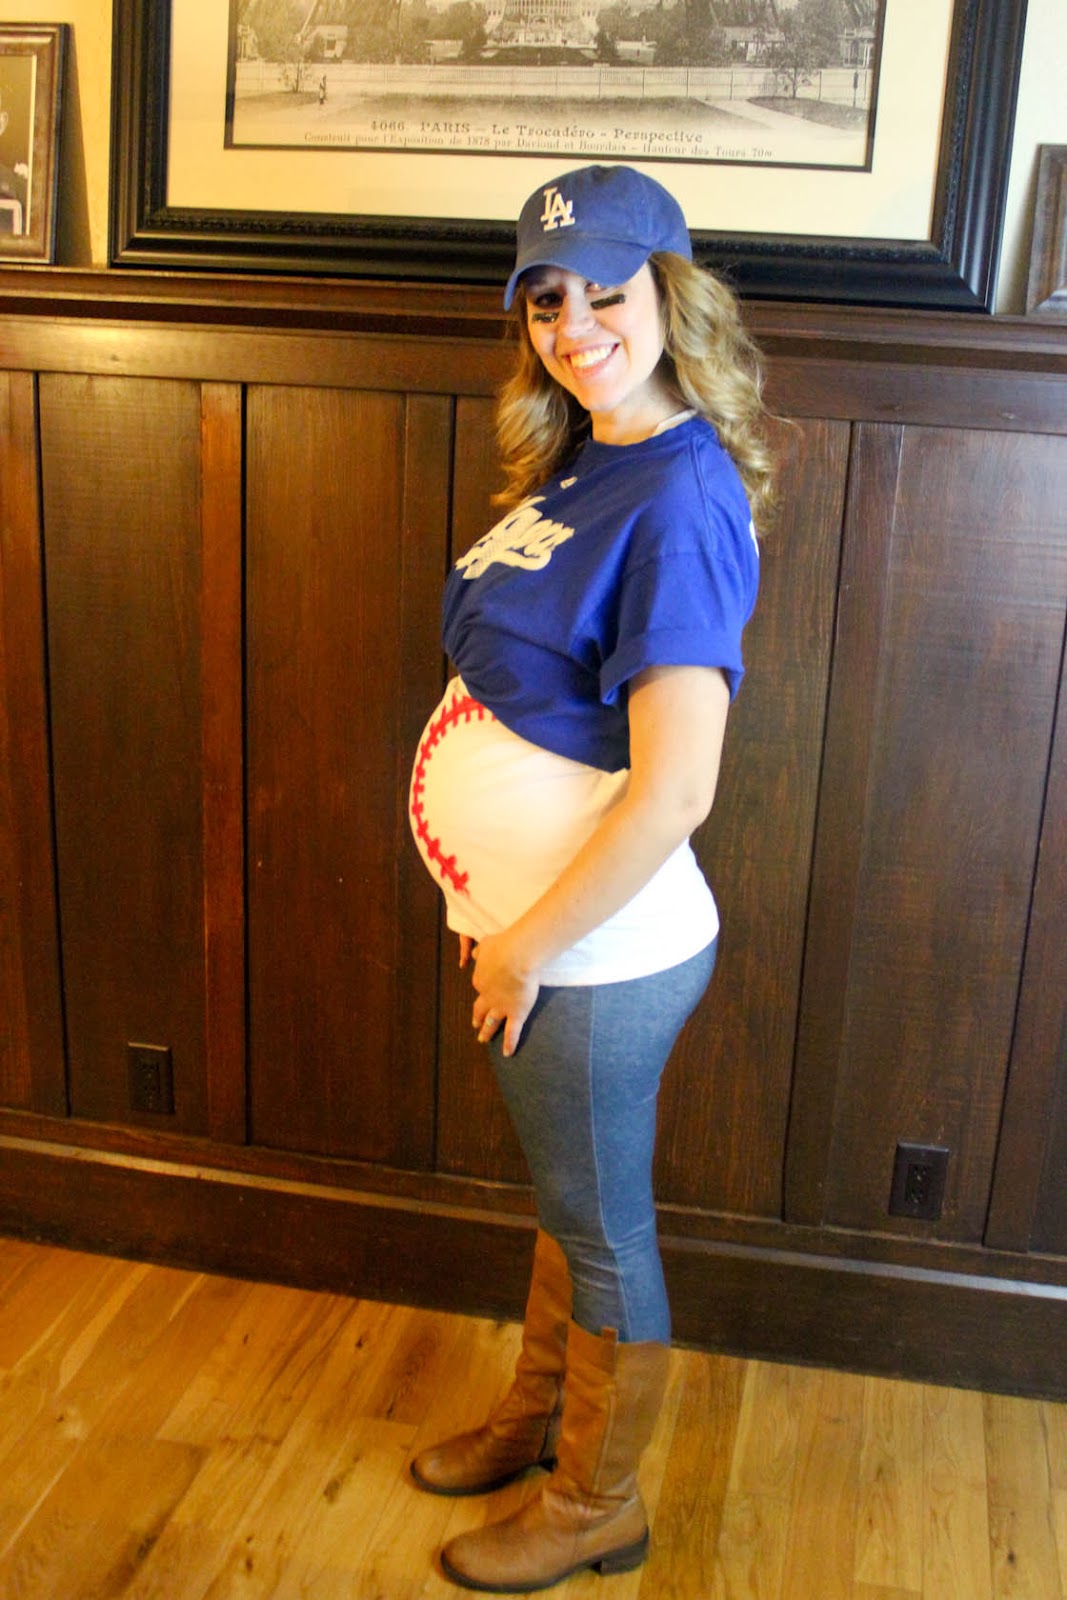 From Dahlias to Doxies DIY Pregnant Baseball and Umpire Costumes